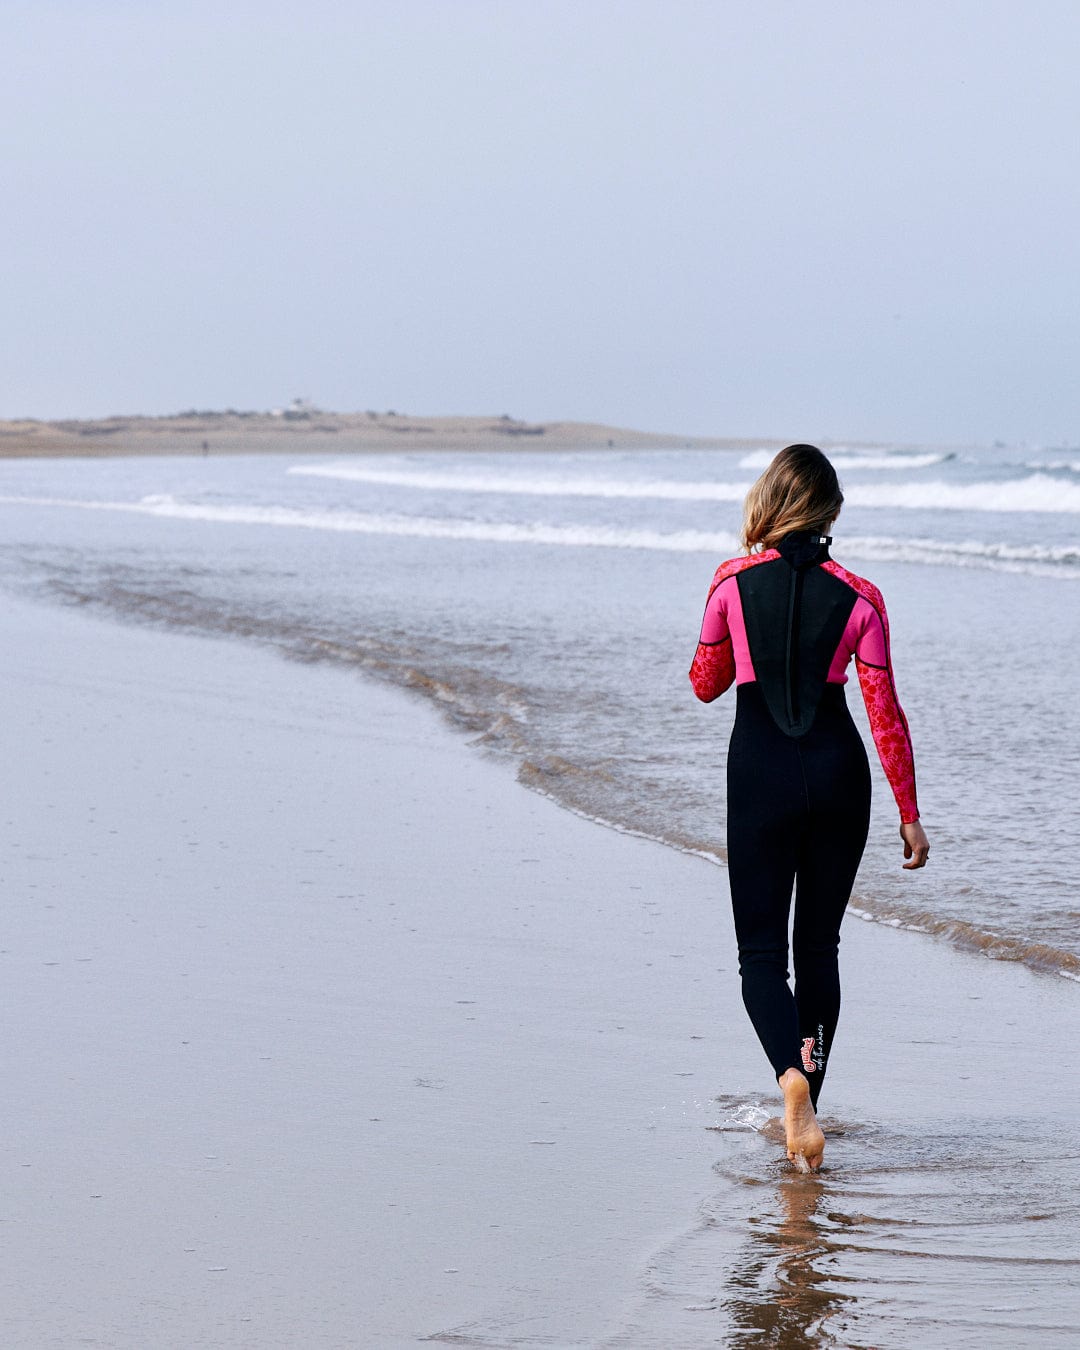 A woman in a Saltrock neoprene wetsuit walks along the shoreline, her back to the camera, facing the waves on a cloudy day.